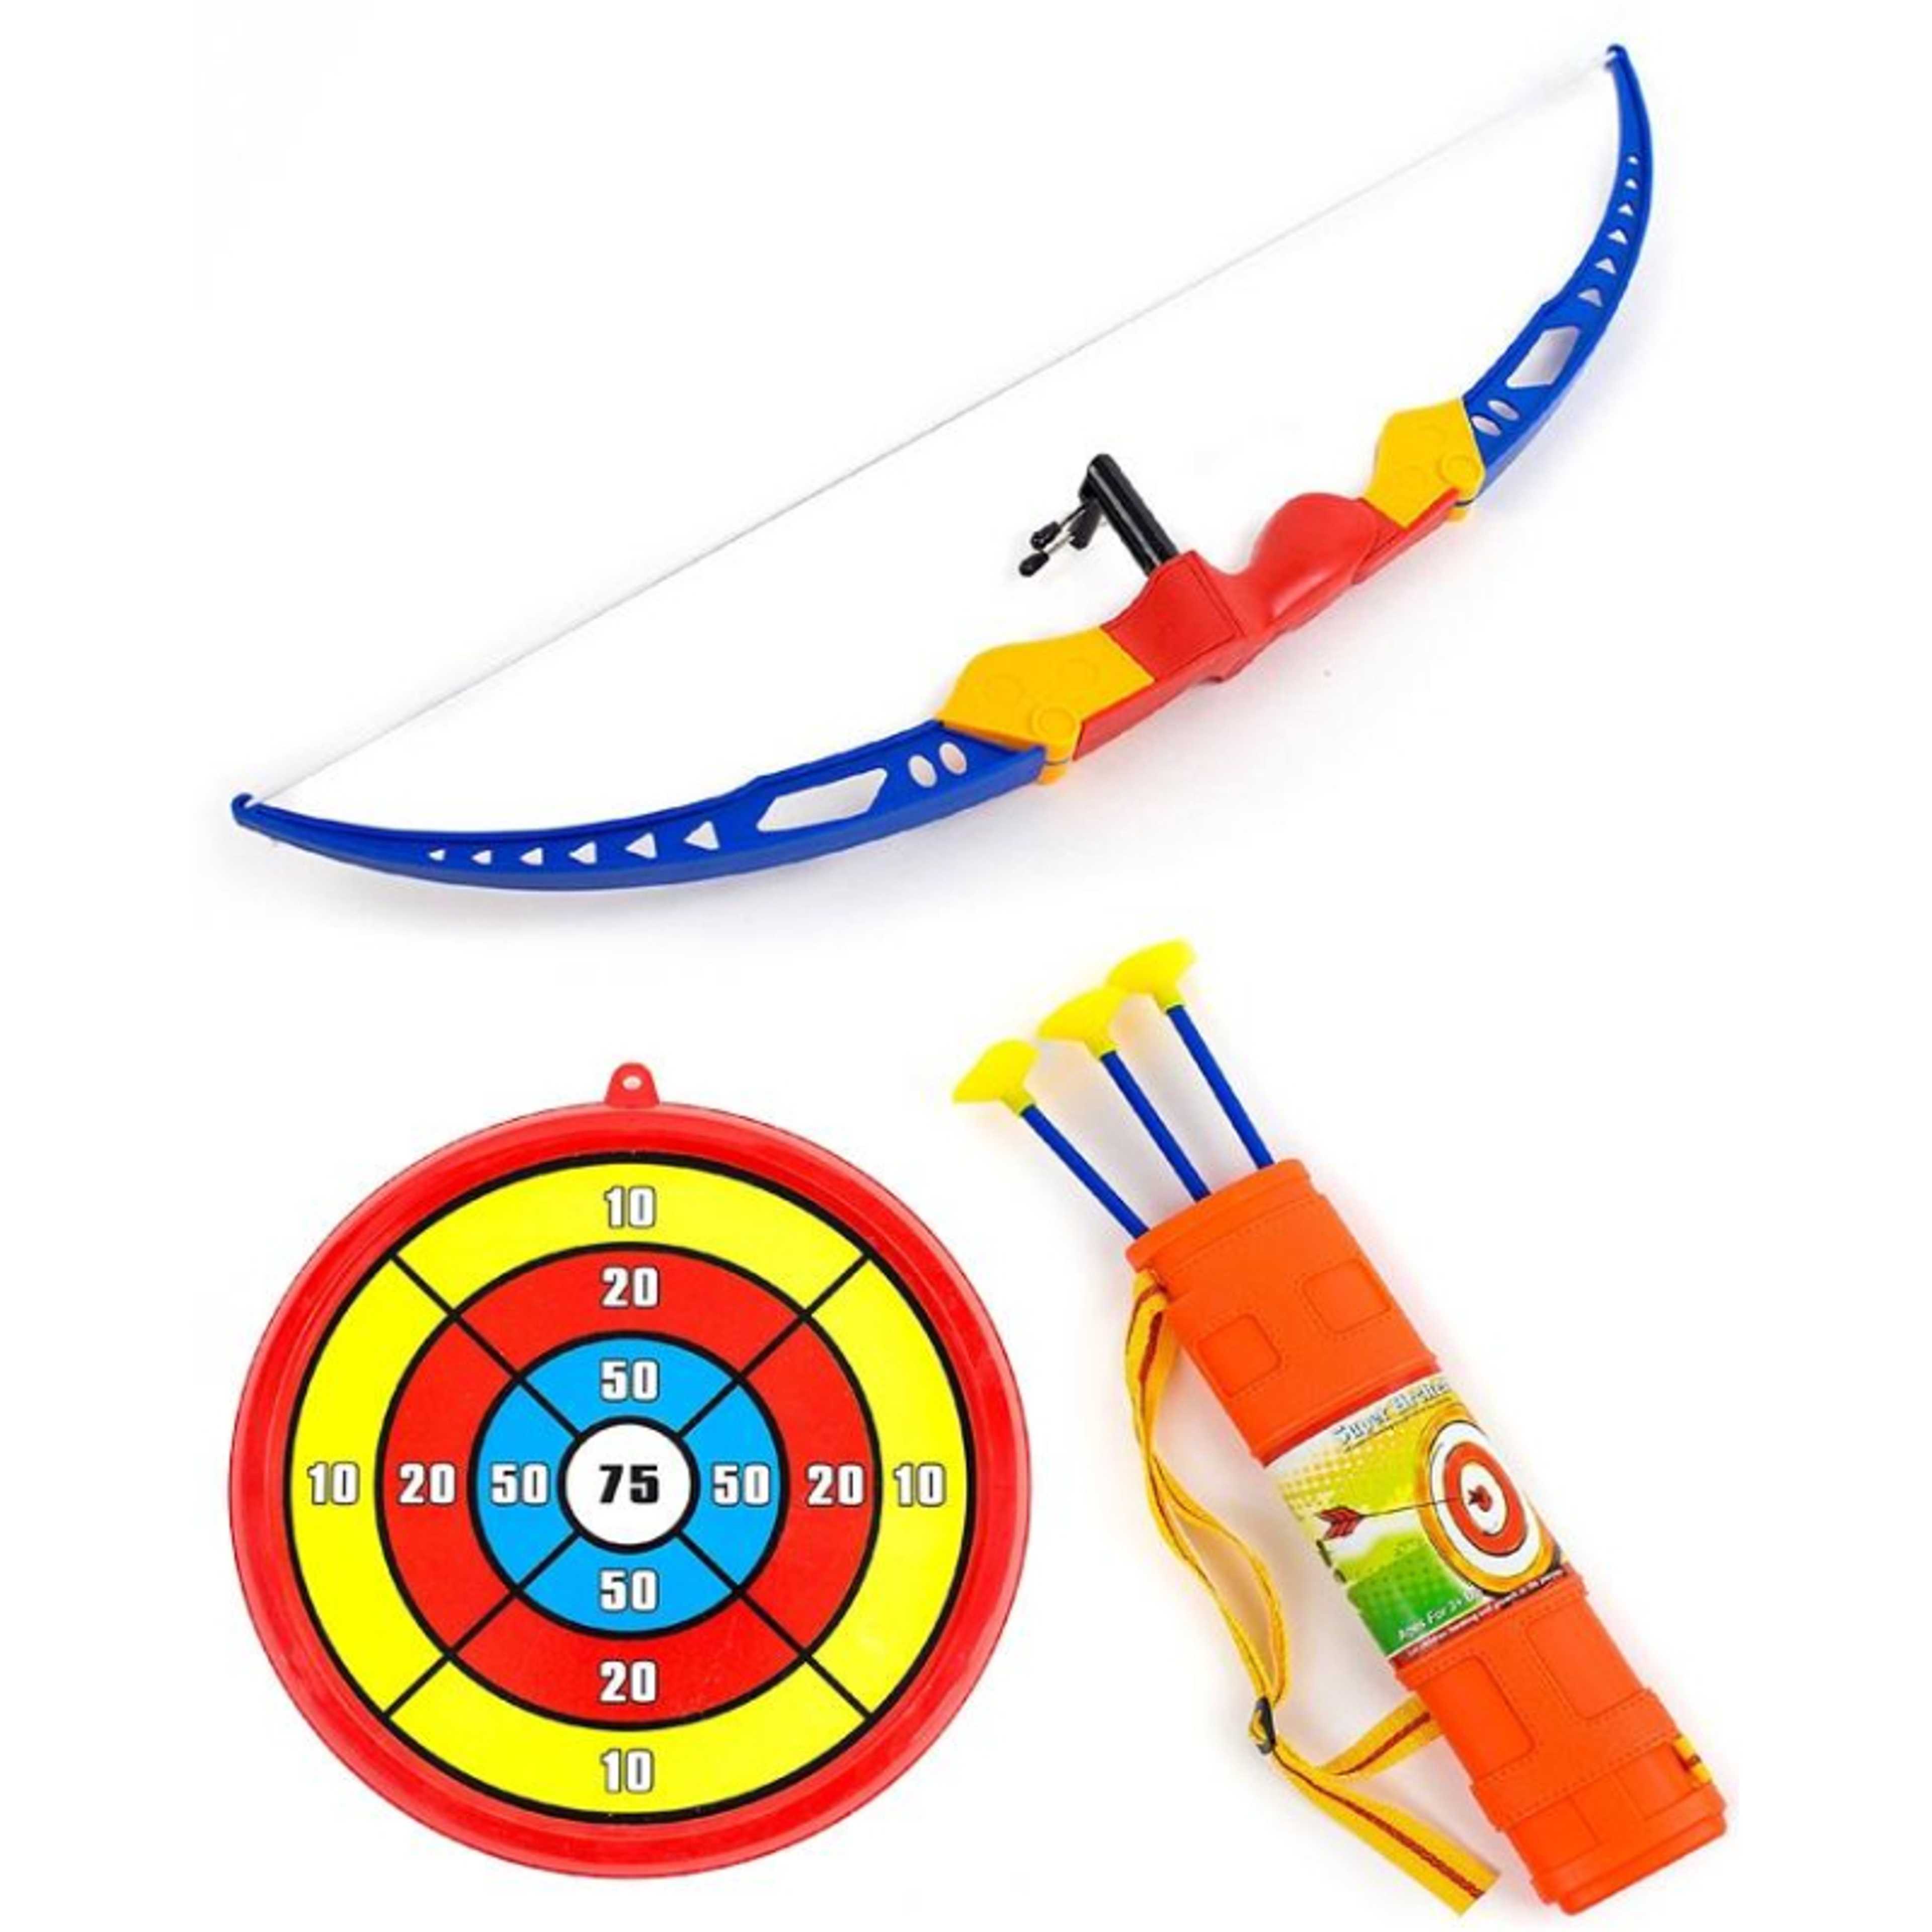 RUBIAN Kids Archery Bow and Arrow Toy Set with Target